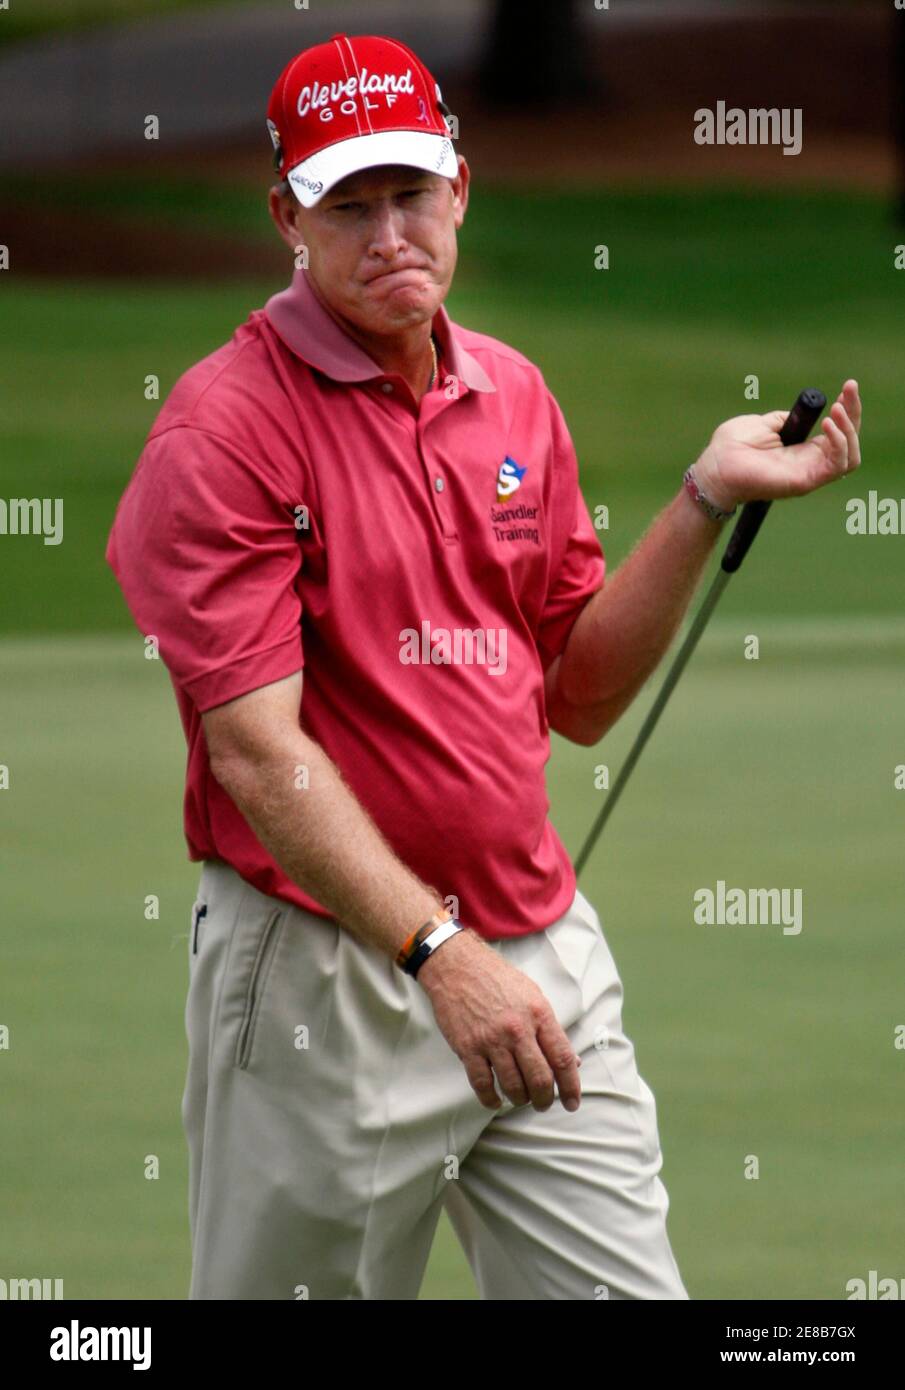 Woody Austin of the U.S reacts as his putt misses the hole on the sixth green during the final round of the St. Jude Classic golf tournament at TPC Southwind in Memphis, Tennessee June 14, 2009.   REUTERS/Nikki Boertman    (UNITED STATES SPORT GOLF) Stock Photo